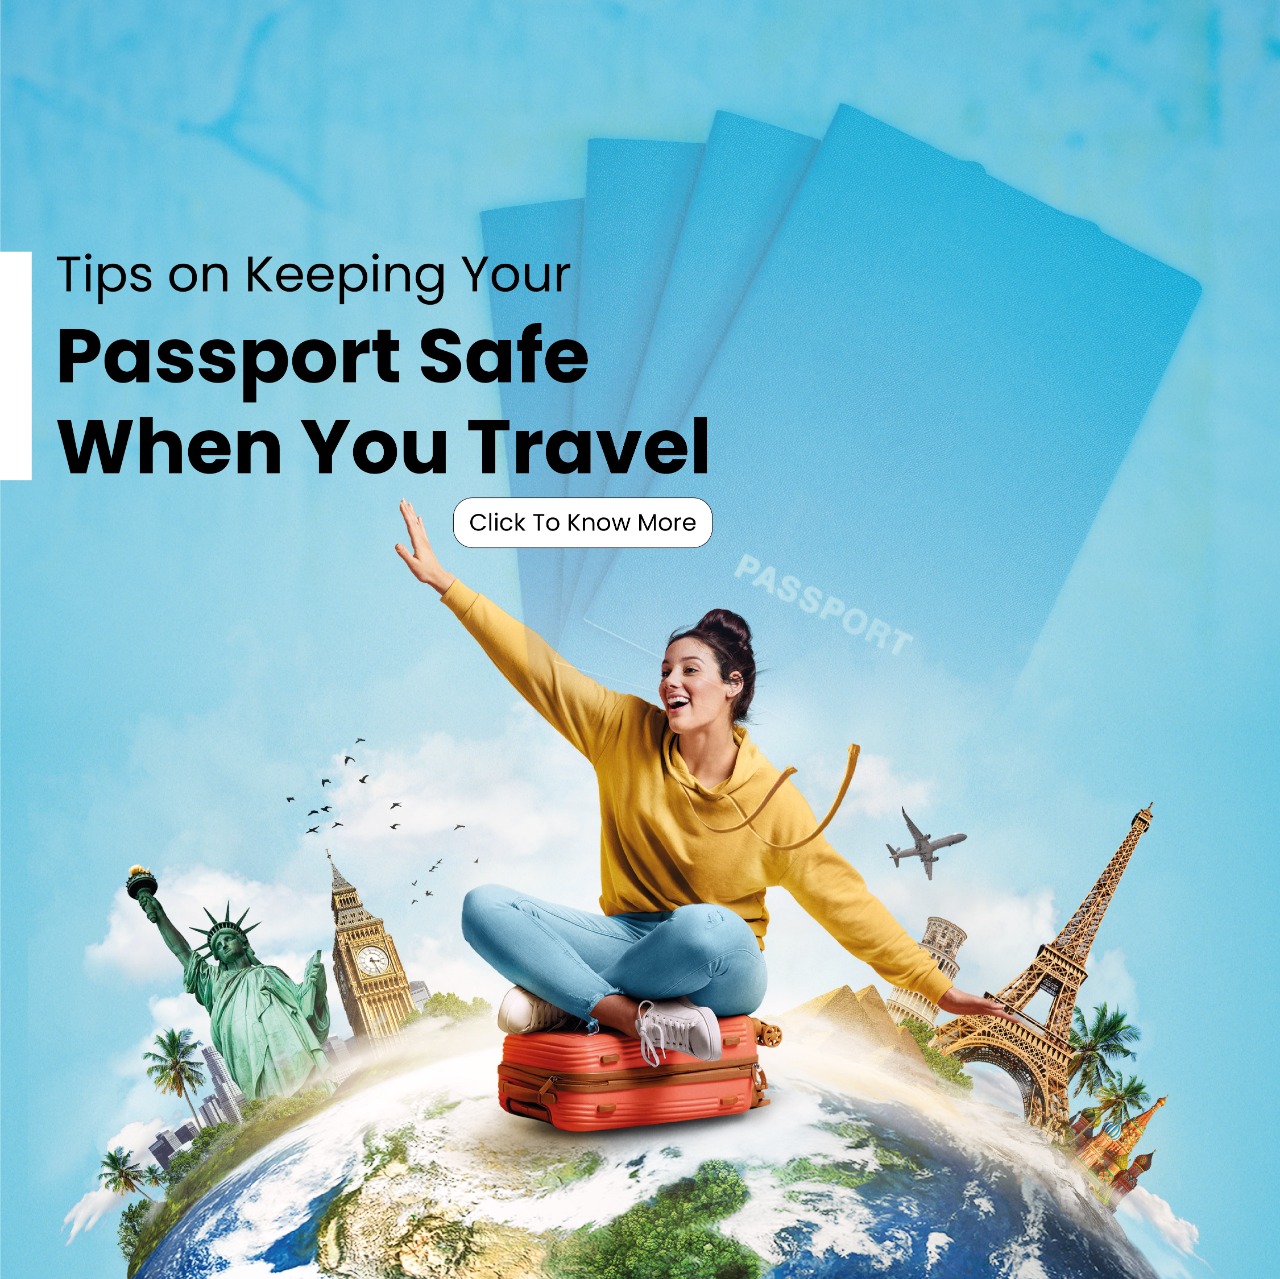 Tips on Keeping Your Passport Safe When You Travel